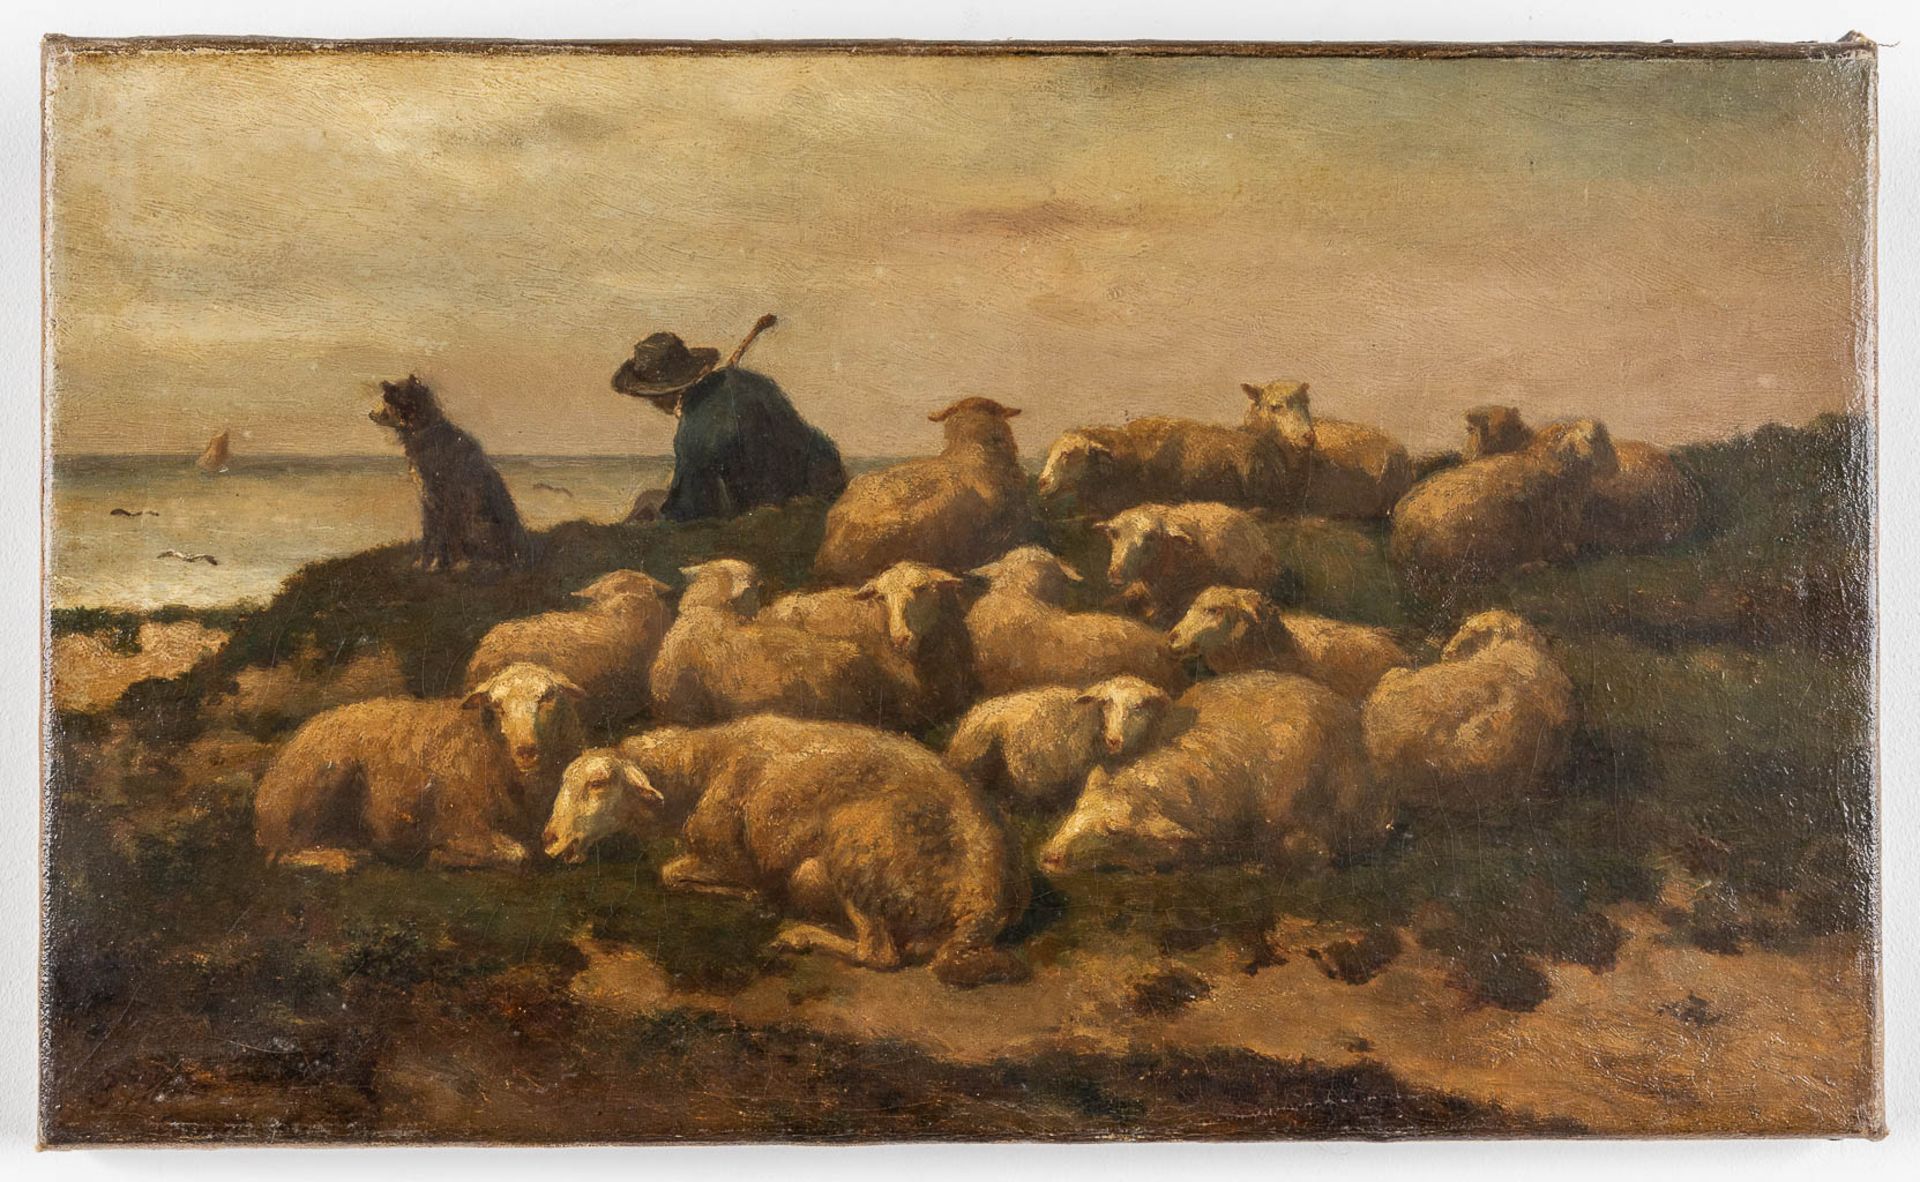 Edouard WOUTERMAERTENS (1819-1897) 'Sheep and shepperd', oil on canvas. (W: 50 x H: 30 cm) - Image 3 of 8